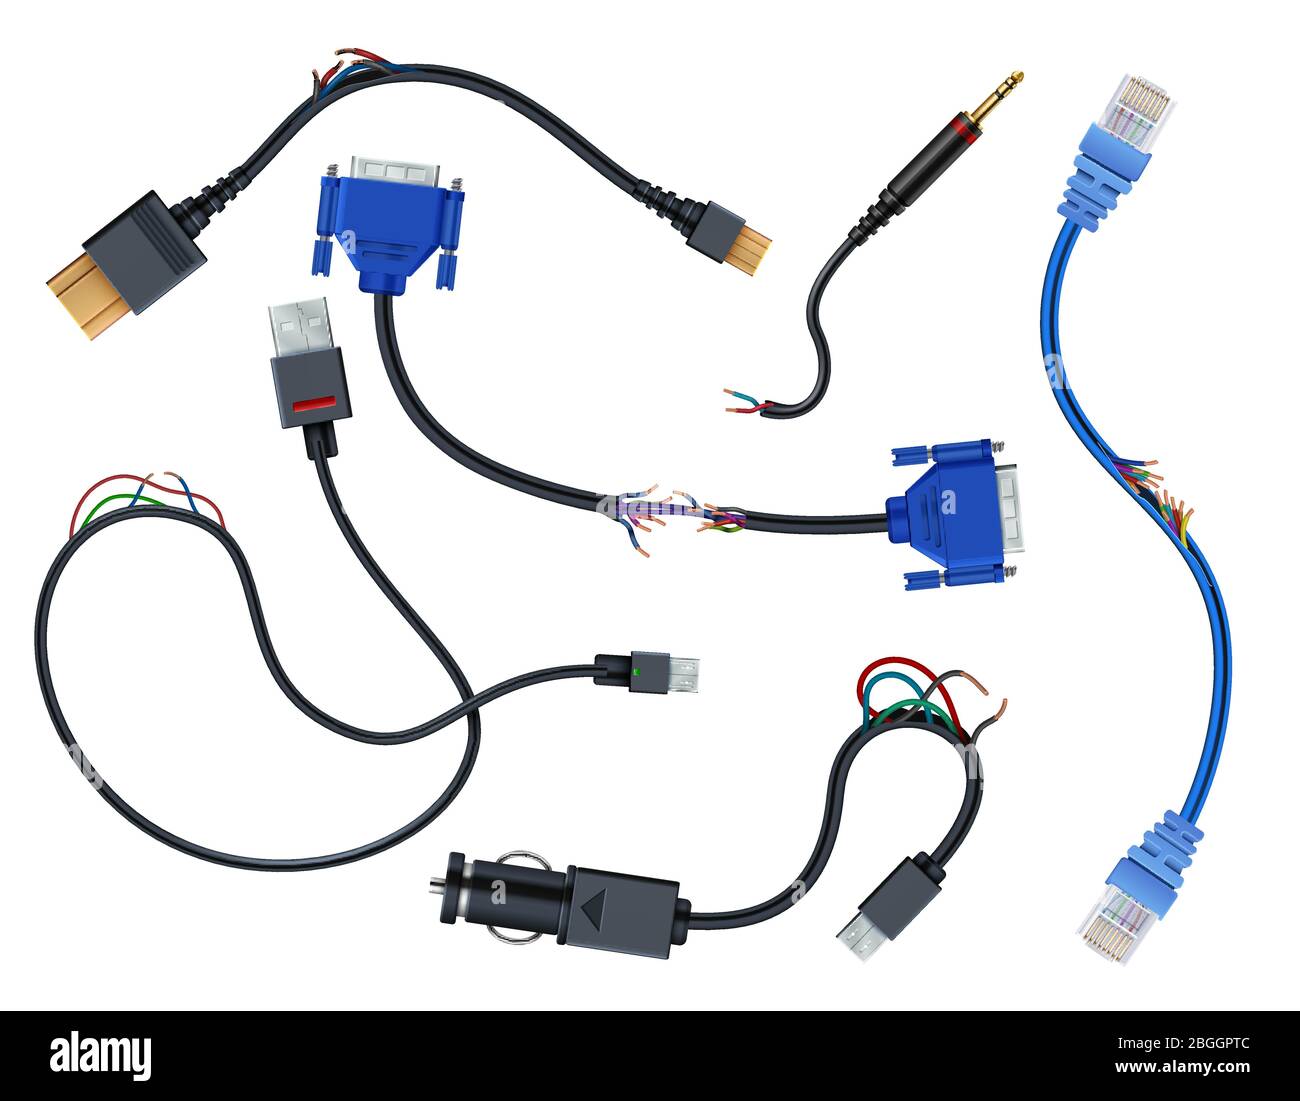 Damaged wires with plugs. Disconnect broken electric cables vector set isolated on white background. Wire and cable cut, vga and usb, sata outlet plug illustration Stock Vector